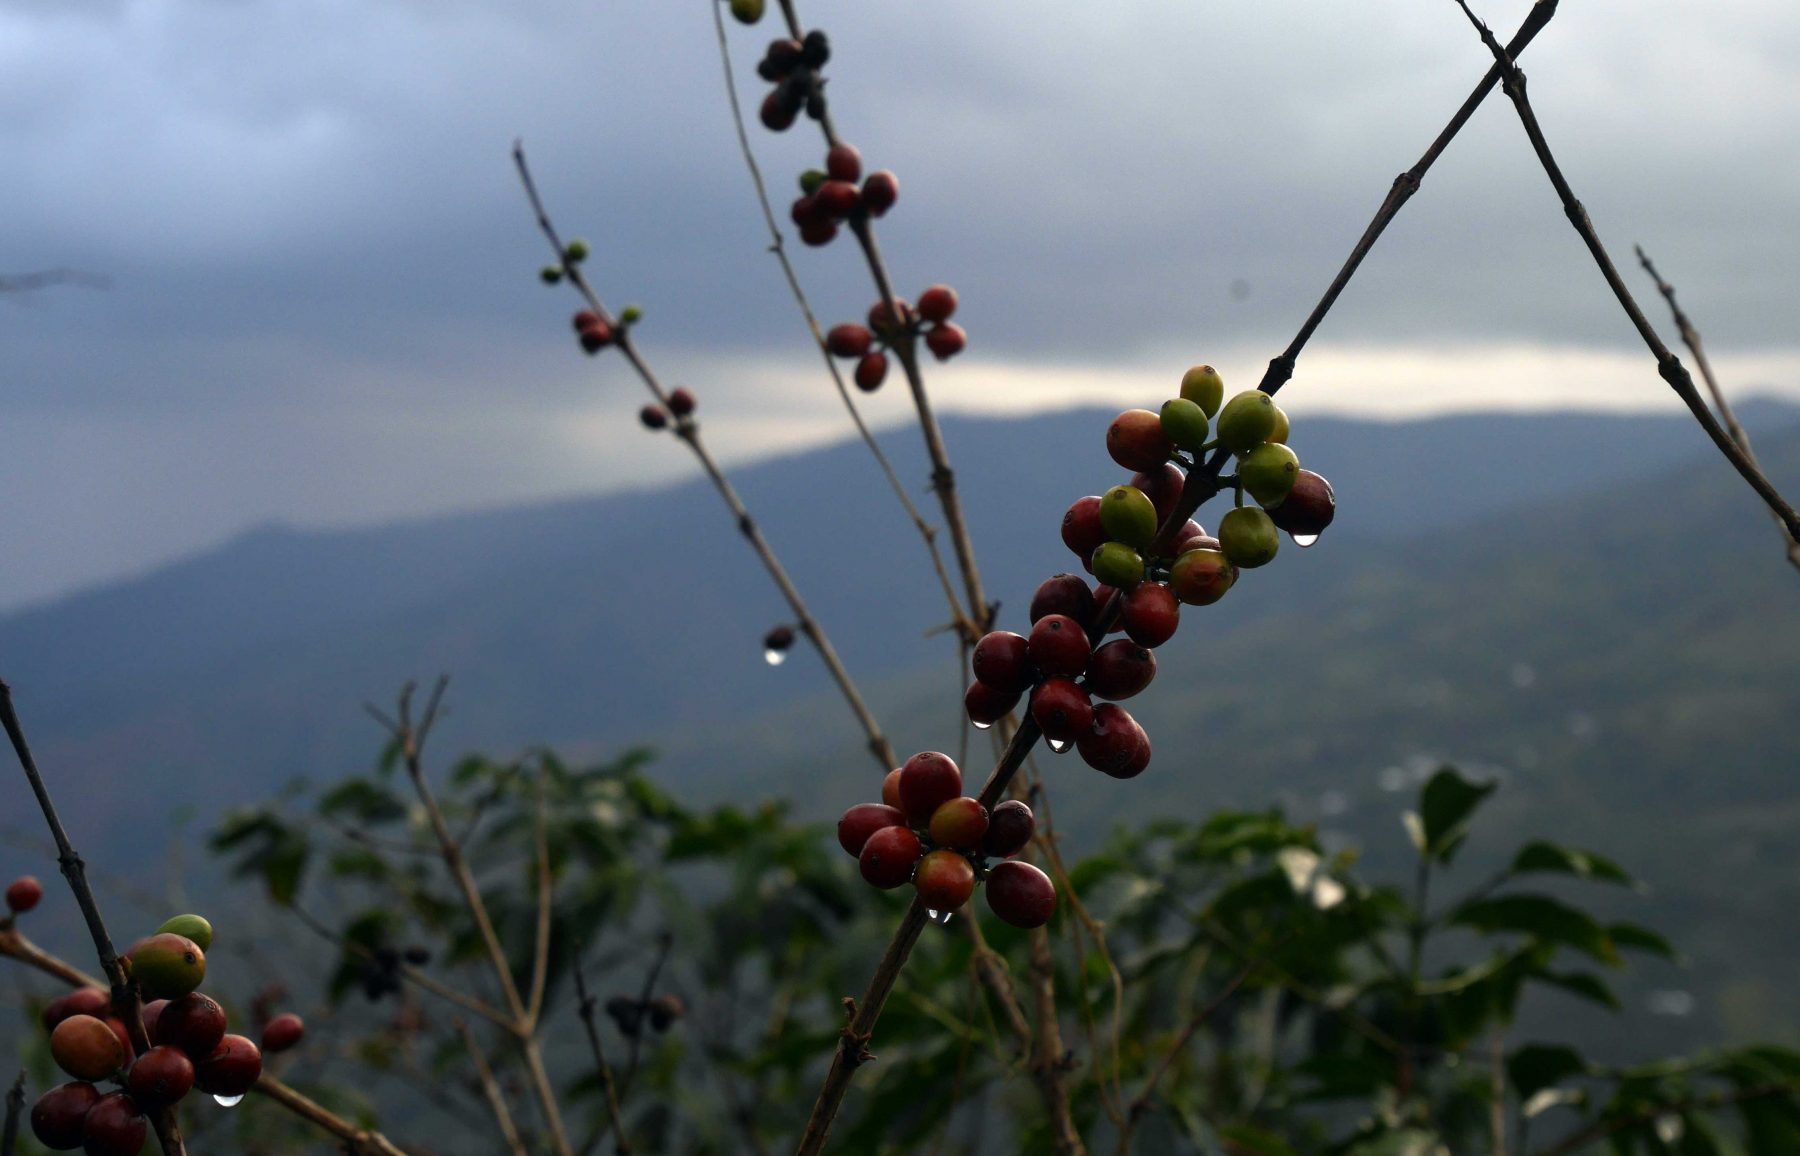 40-year-old-Typica-left-to-grow-wild,-reaching-for-the-clouds-as-the-sun-goes-down-just-outside-the-Village-of-Nueva-York.